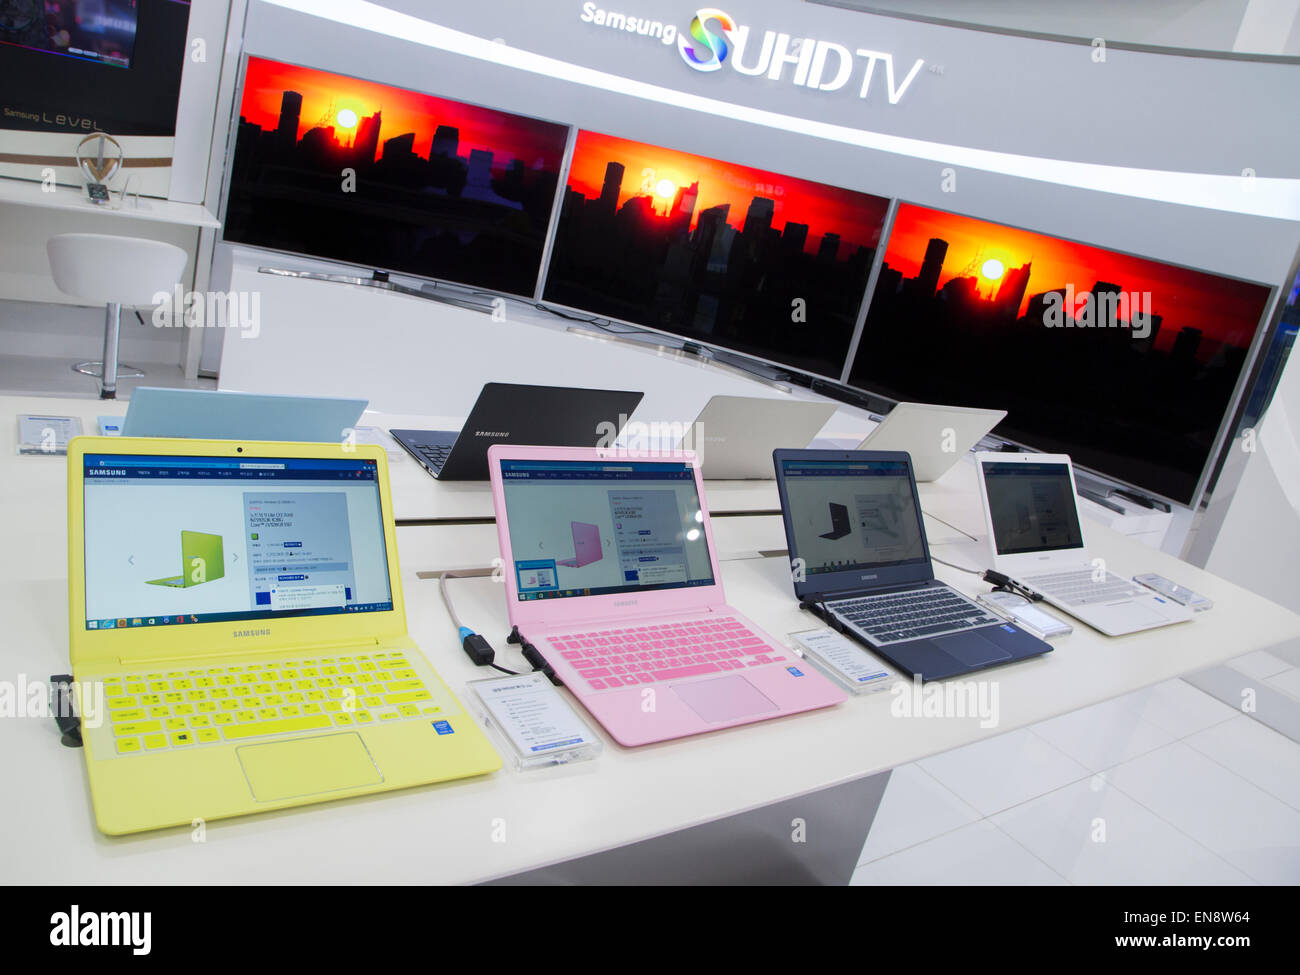 Samsung, Apr 29, 2015 : Samsung Electronics' SUHD TV sets and laptop computers (front) are displayed at Galaxy Zone, a store for display and sale of Samsung Electronics products in Seoul, South Korea. Samsung said on Wednesday its net profit plunged 39 percent in the first quarter from a year earlier because of weak earnings from mobile business, local media reported. © Lee Jae-Won/AFLO/Alamy Live News Stock Photo